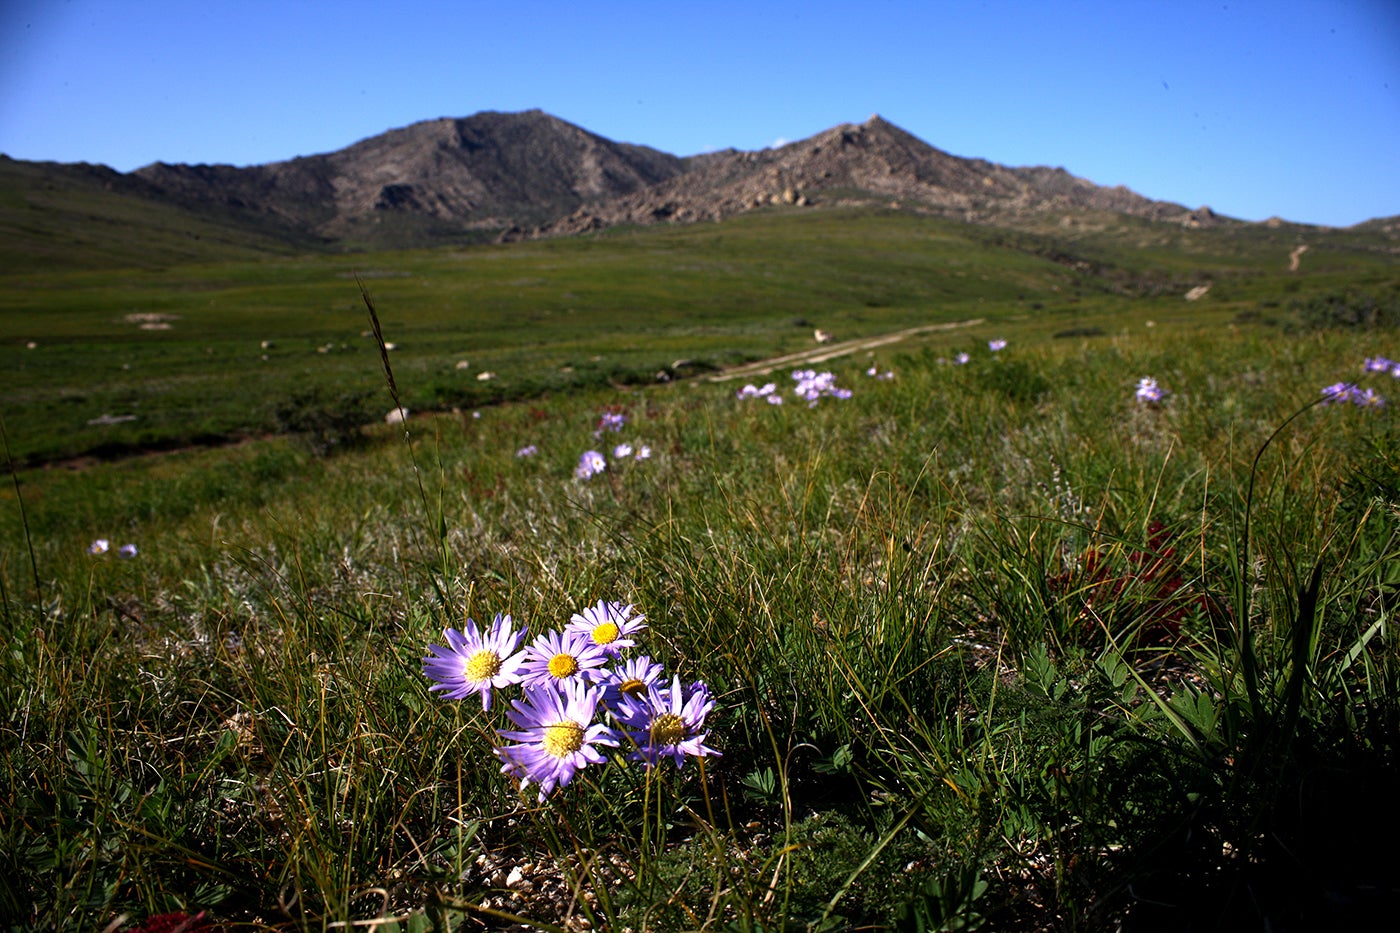 A field with grass, flowers and mountains in the background in Hustai National Park in Mongolia